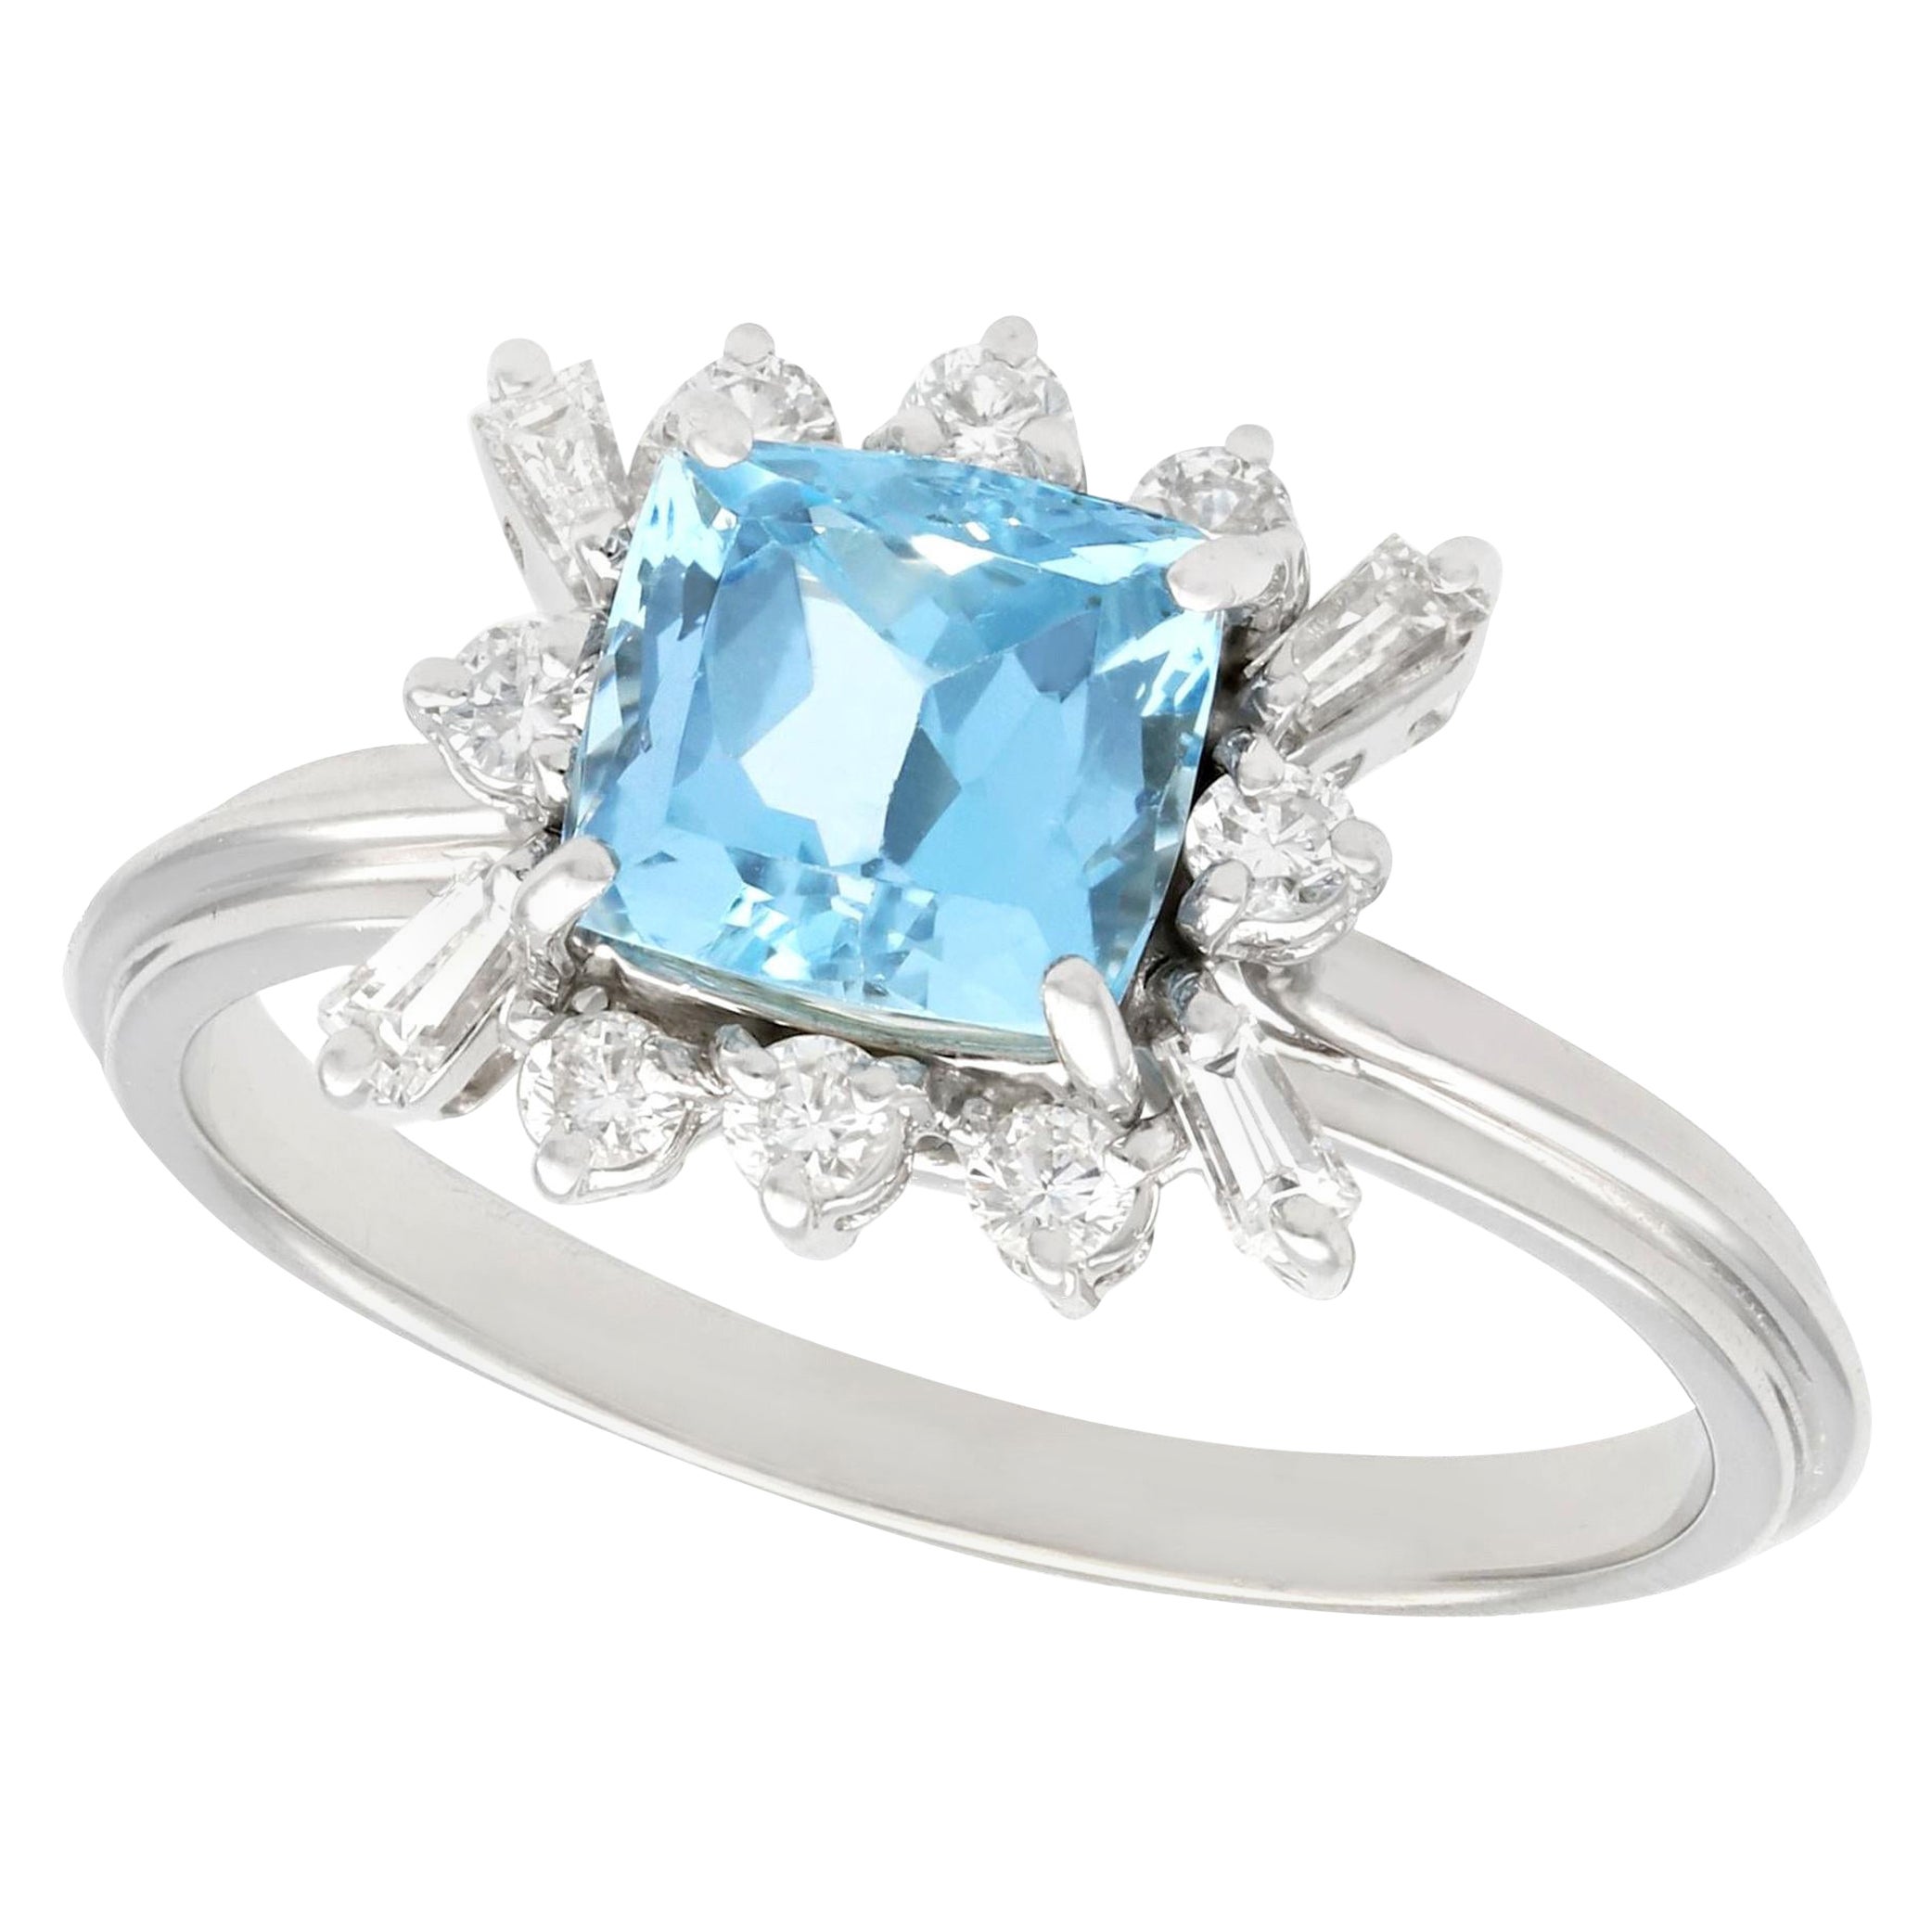 Vintage 1.77 Carat Aquamarine and Diamond White Gold Cocktail Ring For Sale